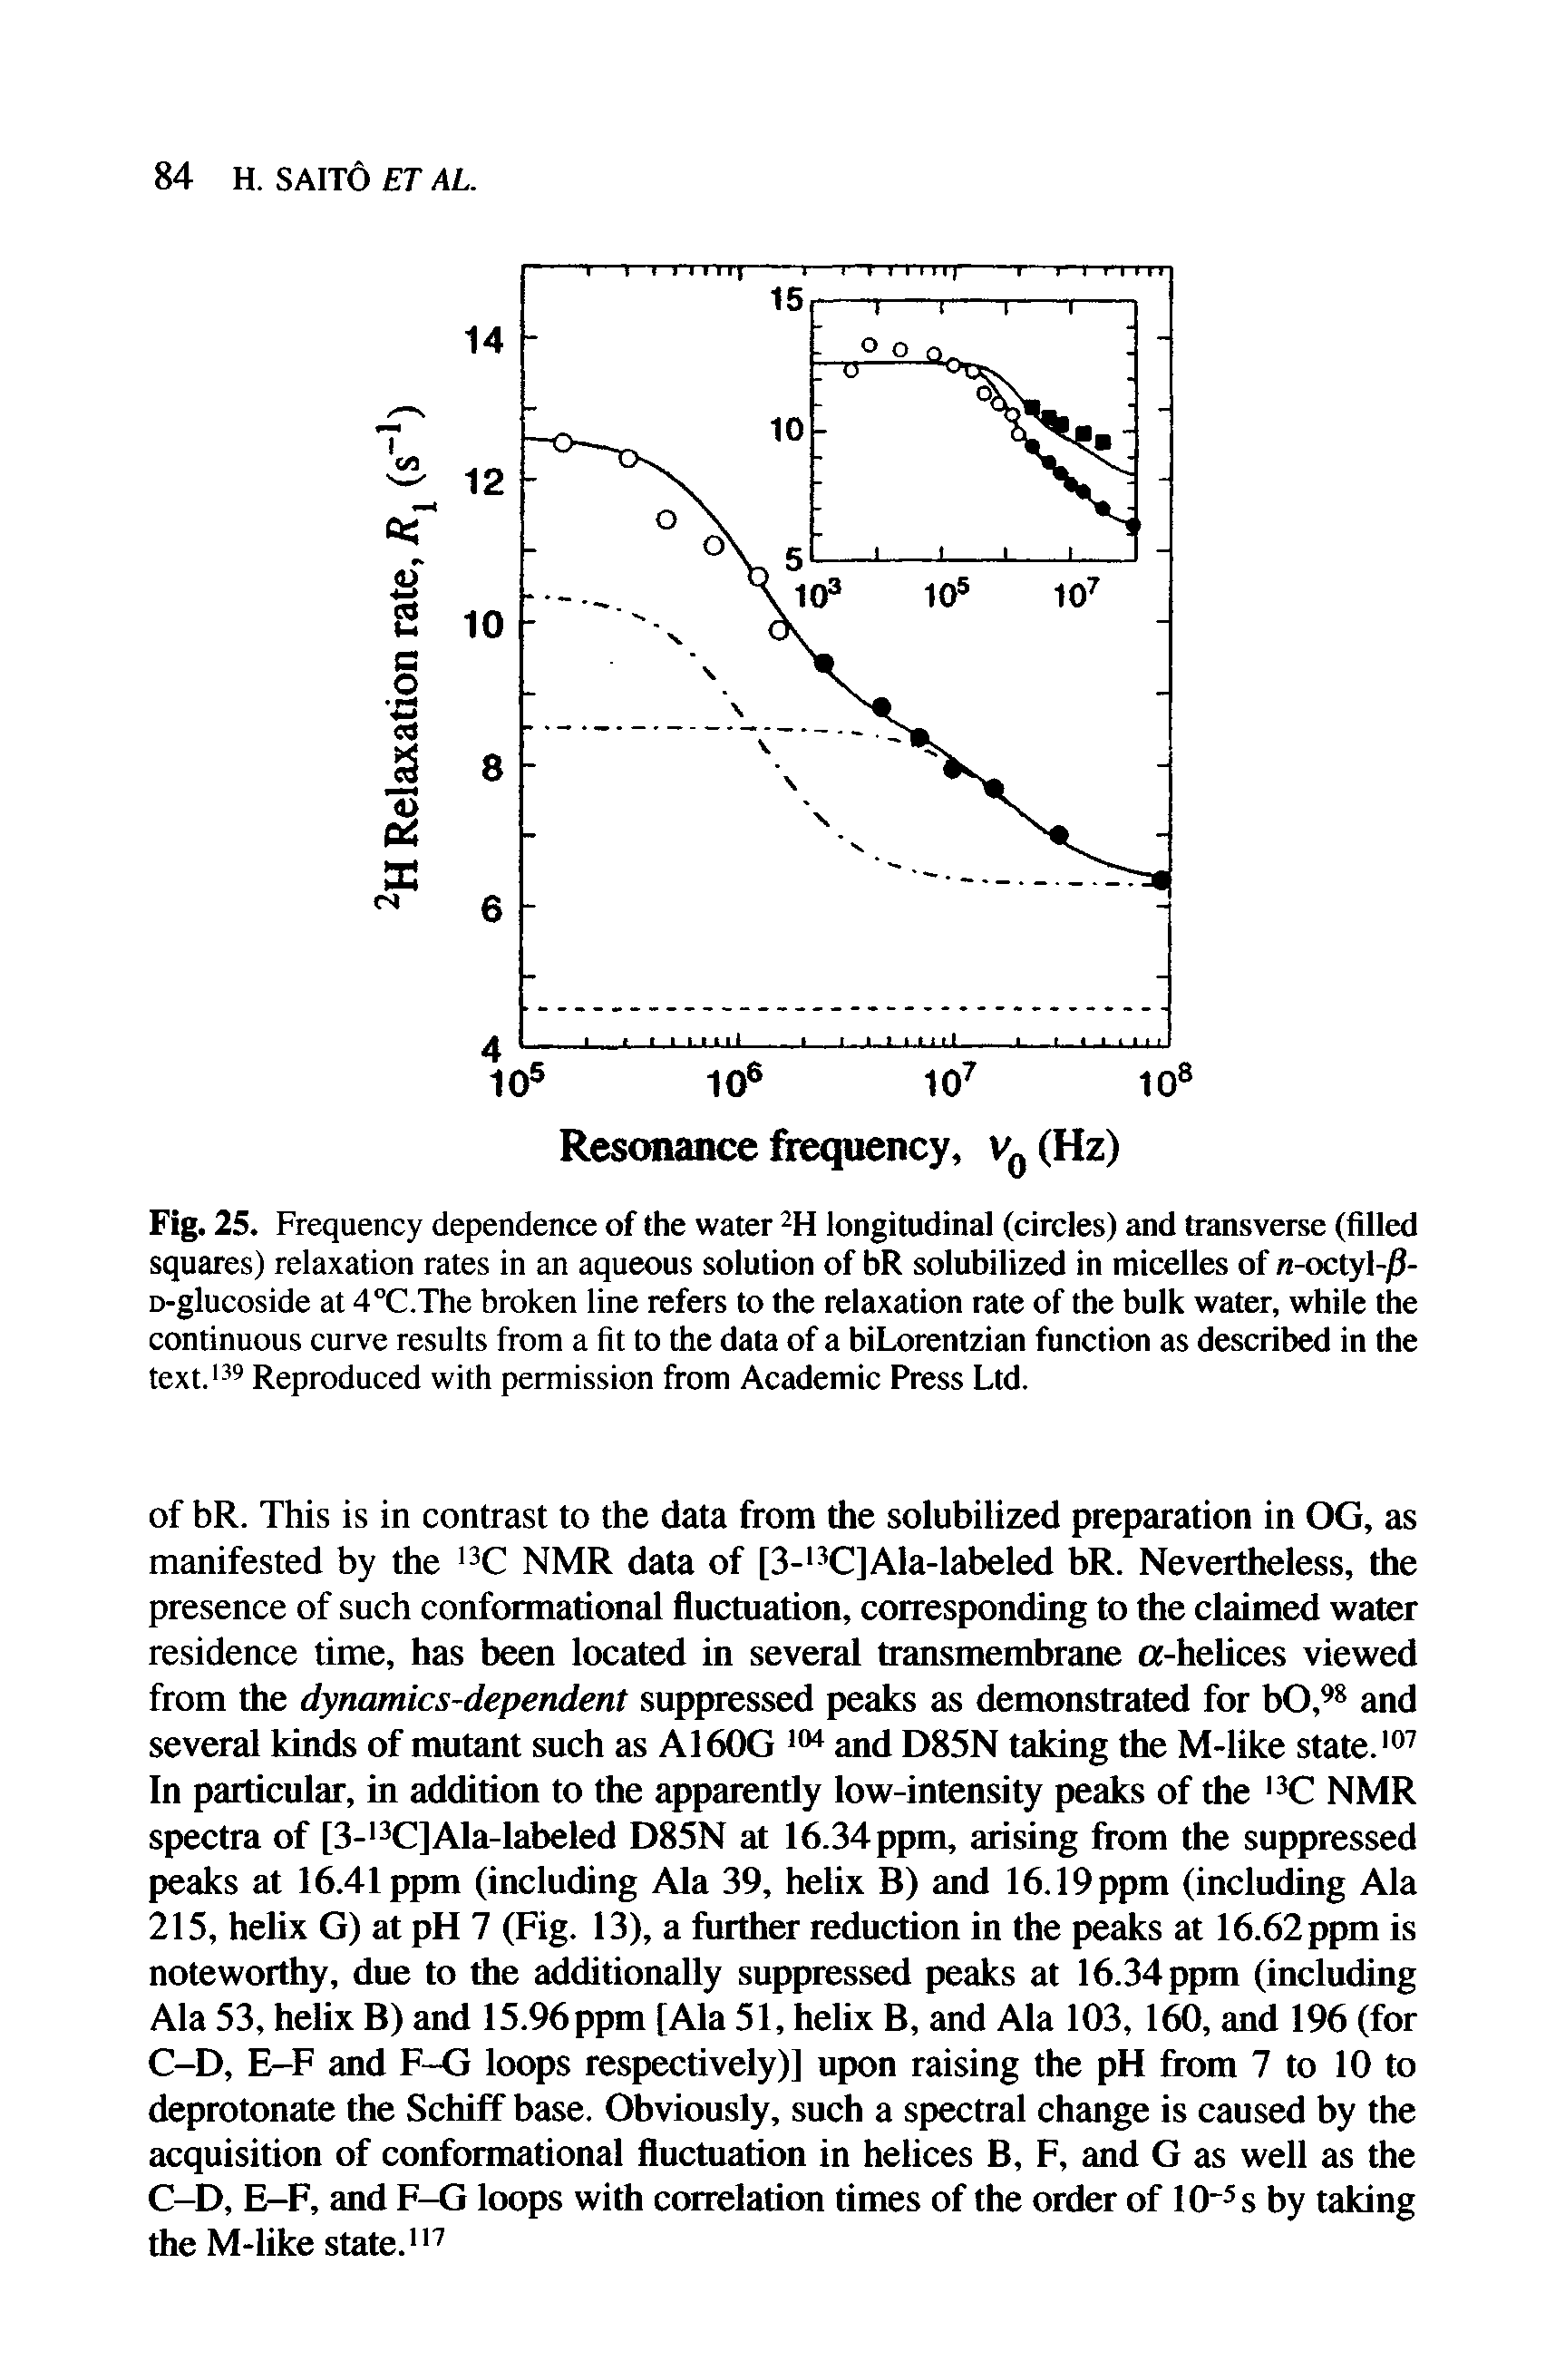 Fig. 25. Frequency dependence of the water 2H longitudinal (circles) and transverse (filled squares) relaxation rates in an aqueous solution of bR solubilized in micelles of n-octyl-/)-D-glucoside at 4°C.The broken line refers to the relaxation rate of the bulk water, while the continuous curve results from a fit to the data of a biLorentzian function as described in the text.139 Reproduced with permission from Academic Press Ltd.